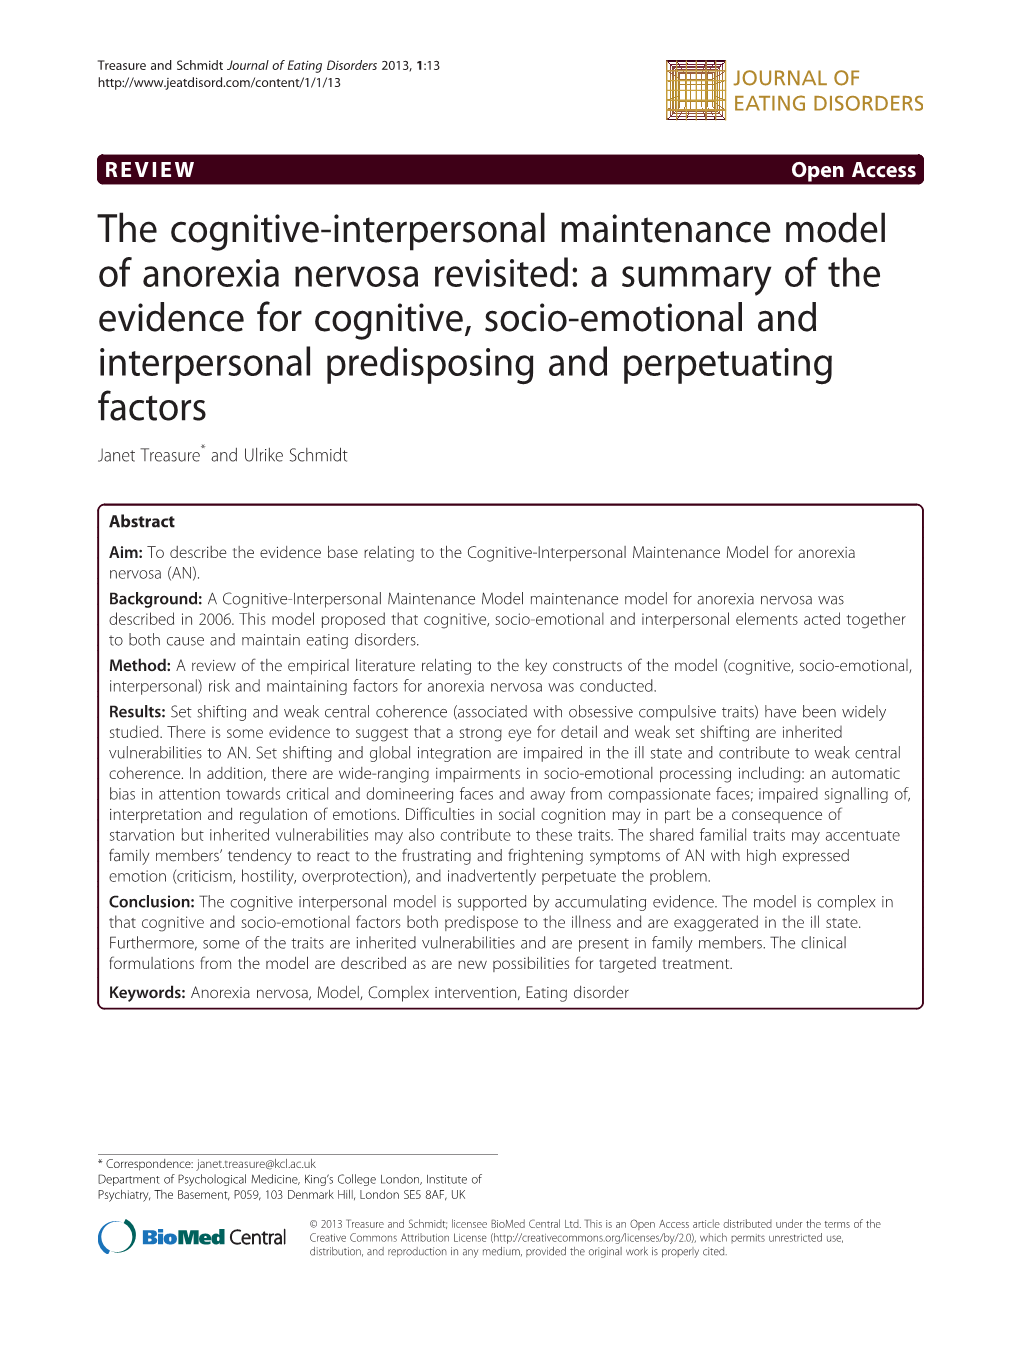 The Cognitive-Interpersonal Maintenance Model of Anorexia